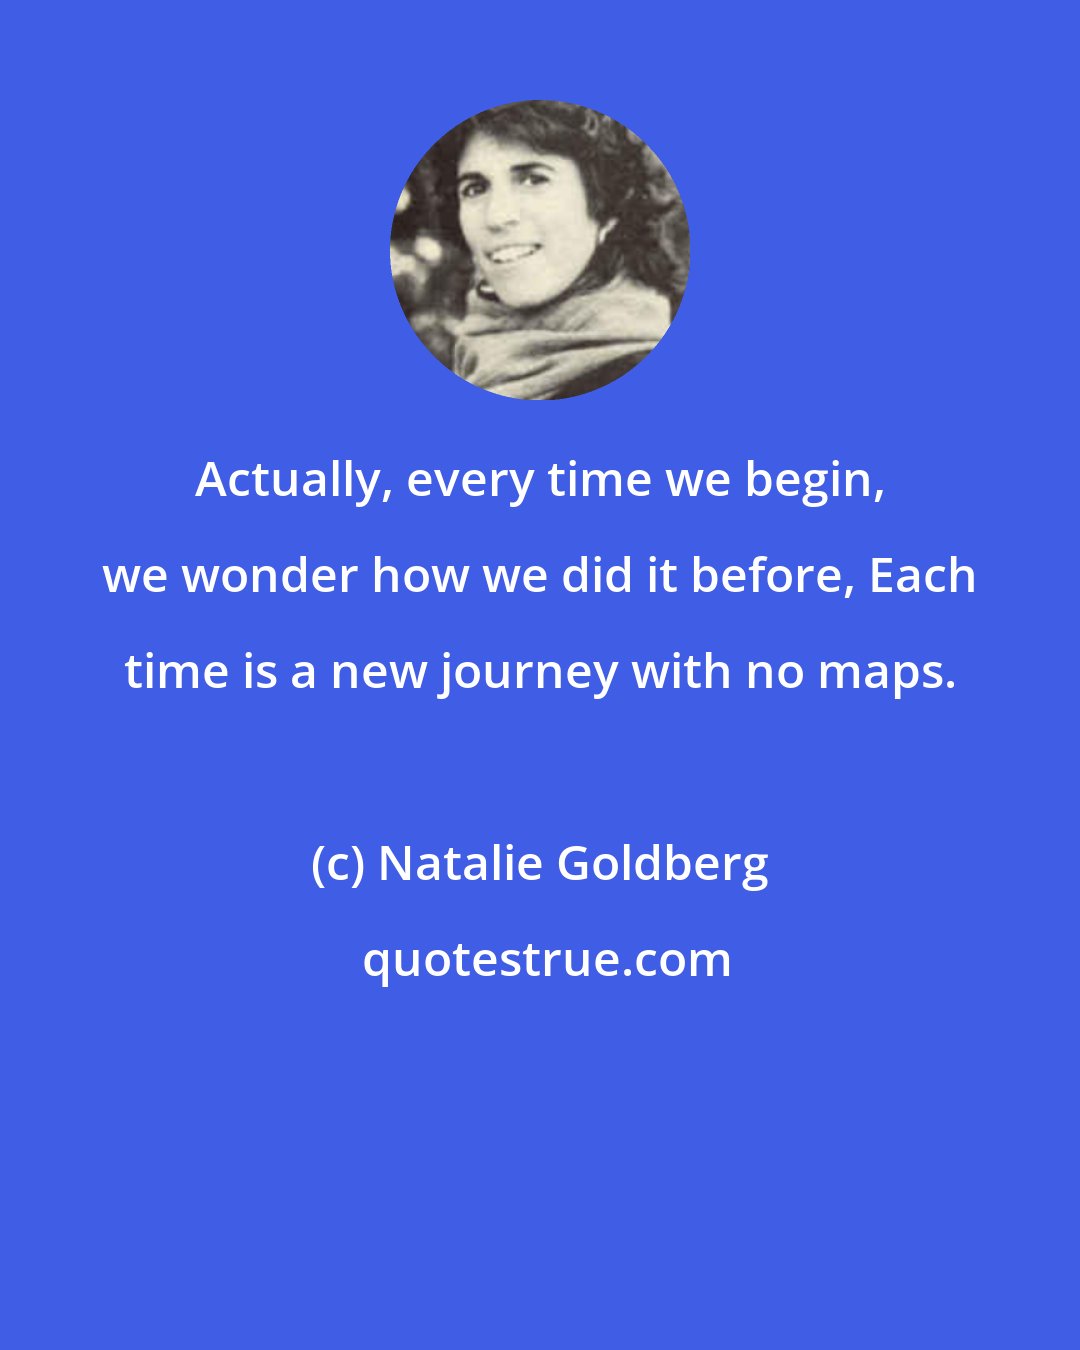 Natalie Goldberg: Actually, every time we begin, we wonder how we did it before, Each time is a new journey with no maps.